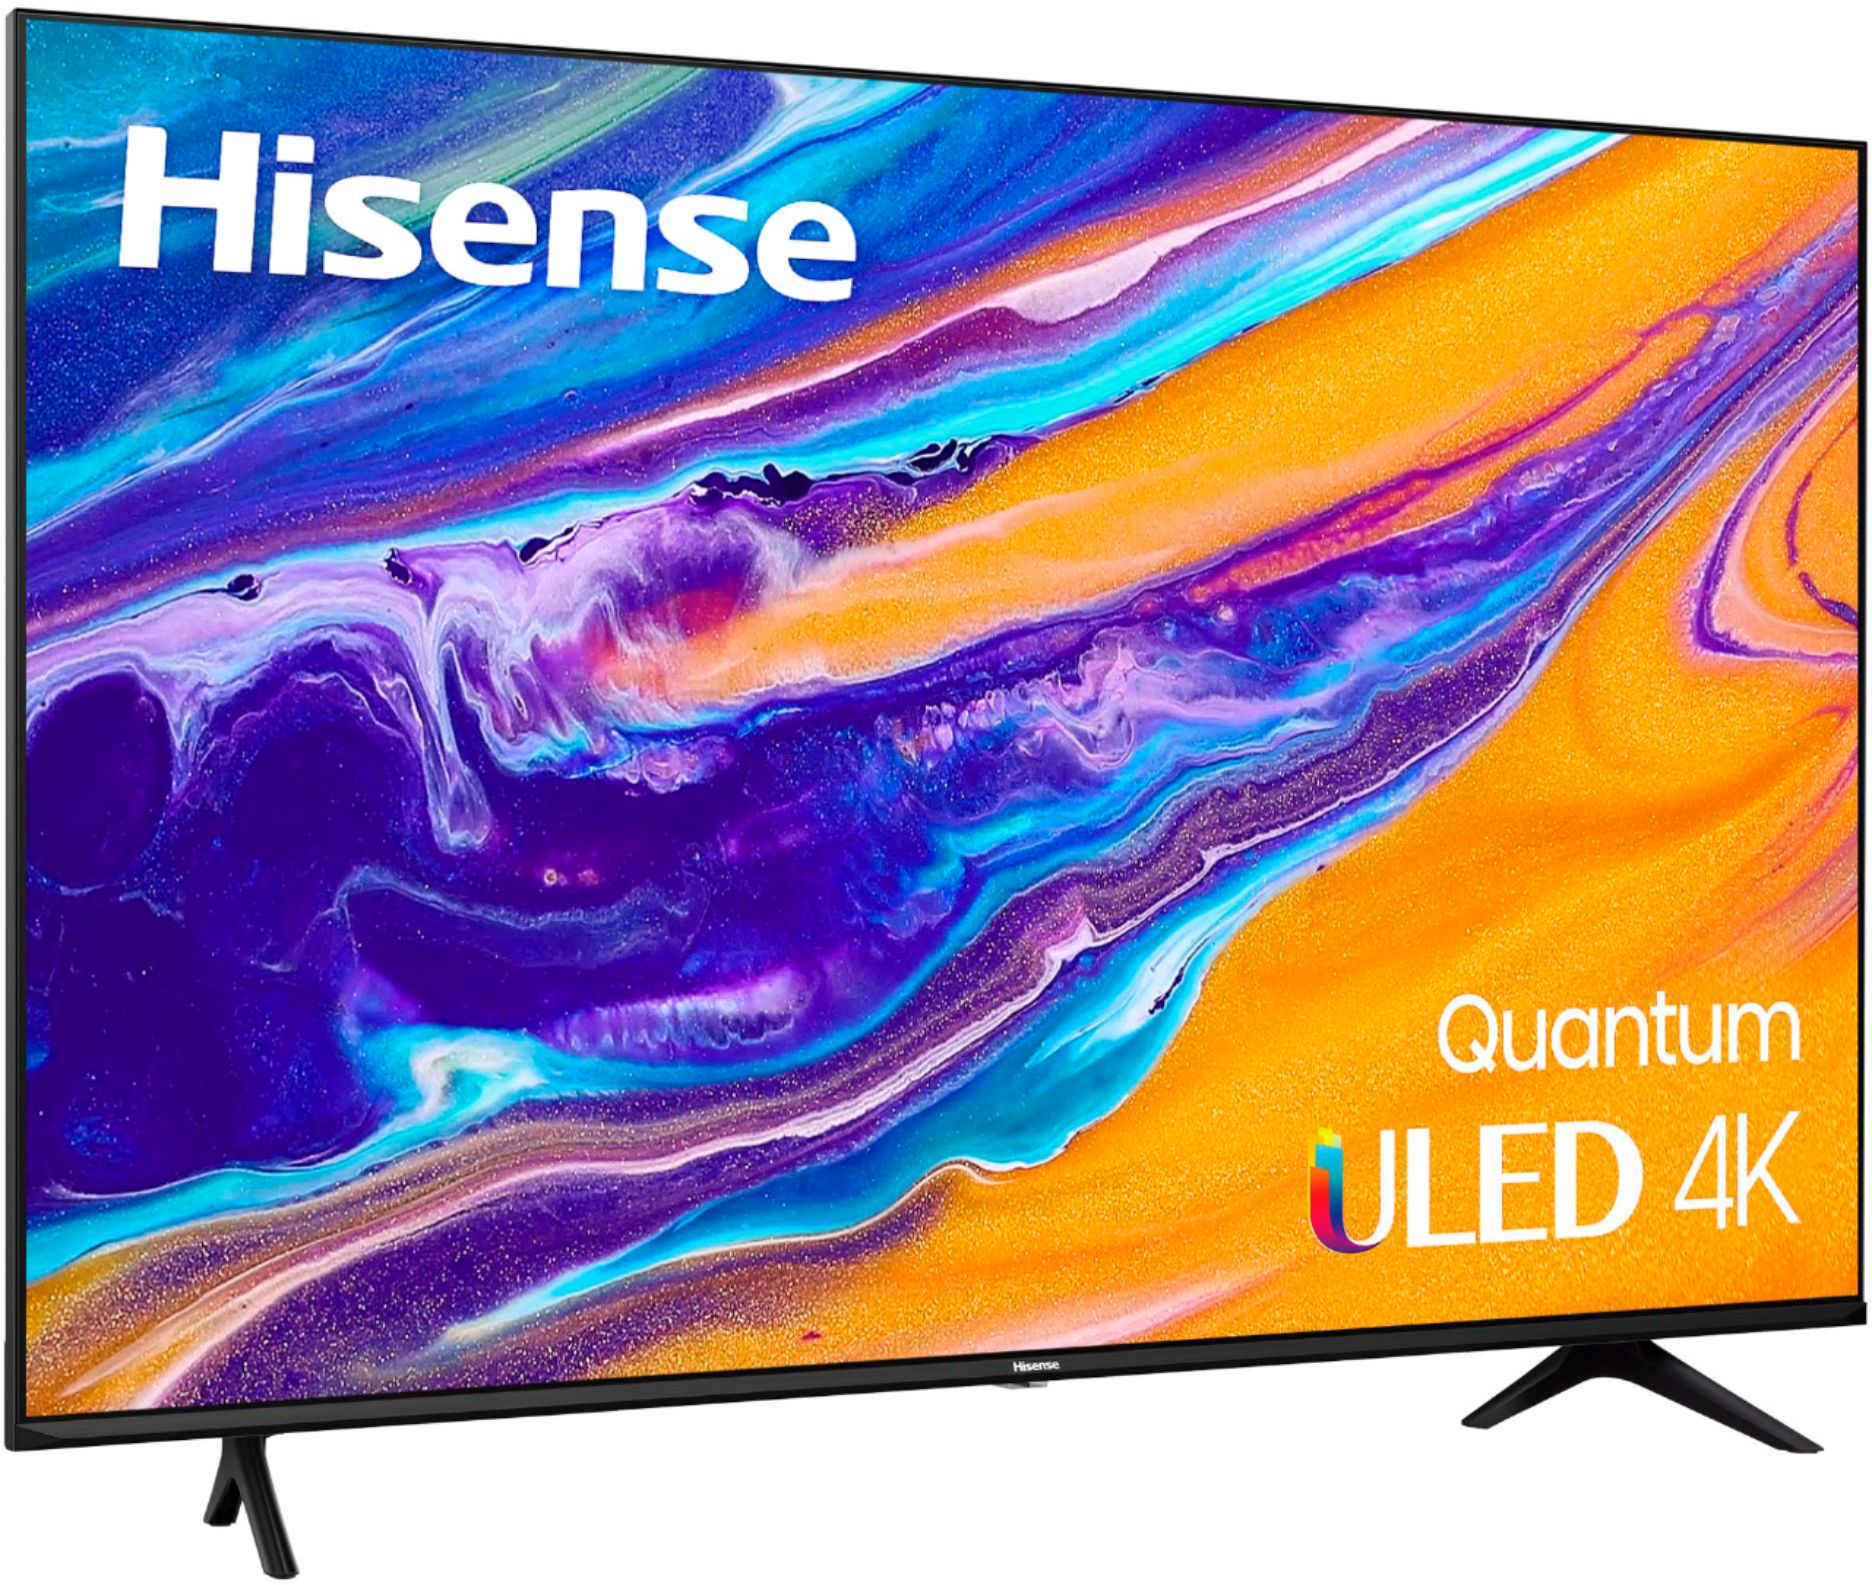 Hisense Announces Pricing and Availability for U6K Series ULED TVs 